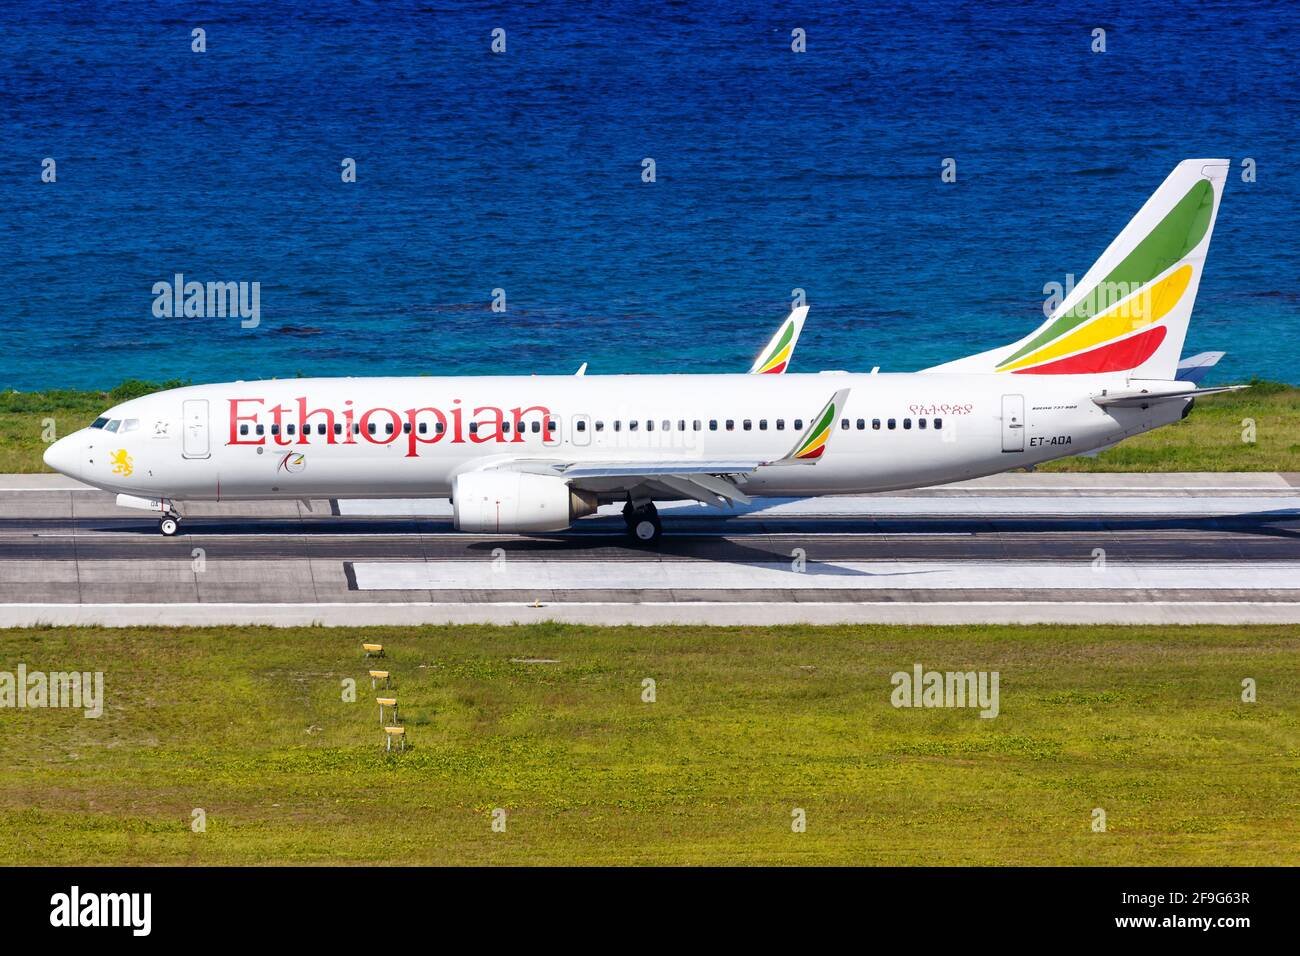 Mahe, Seychelles - November 25, 2017: Ethiopian Boeing 737-800 airplane at Seychelles International Airport (SEZ) in the Seychelles. Boeing is an Amer Stock Photo